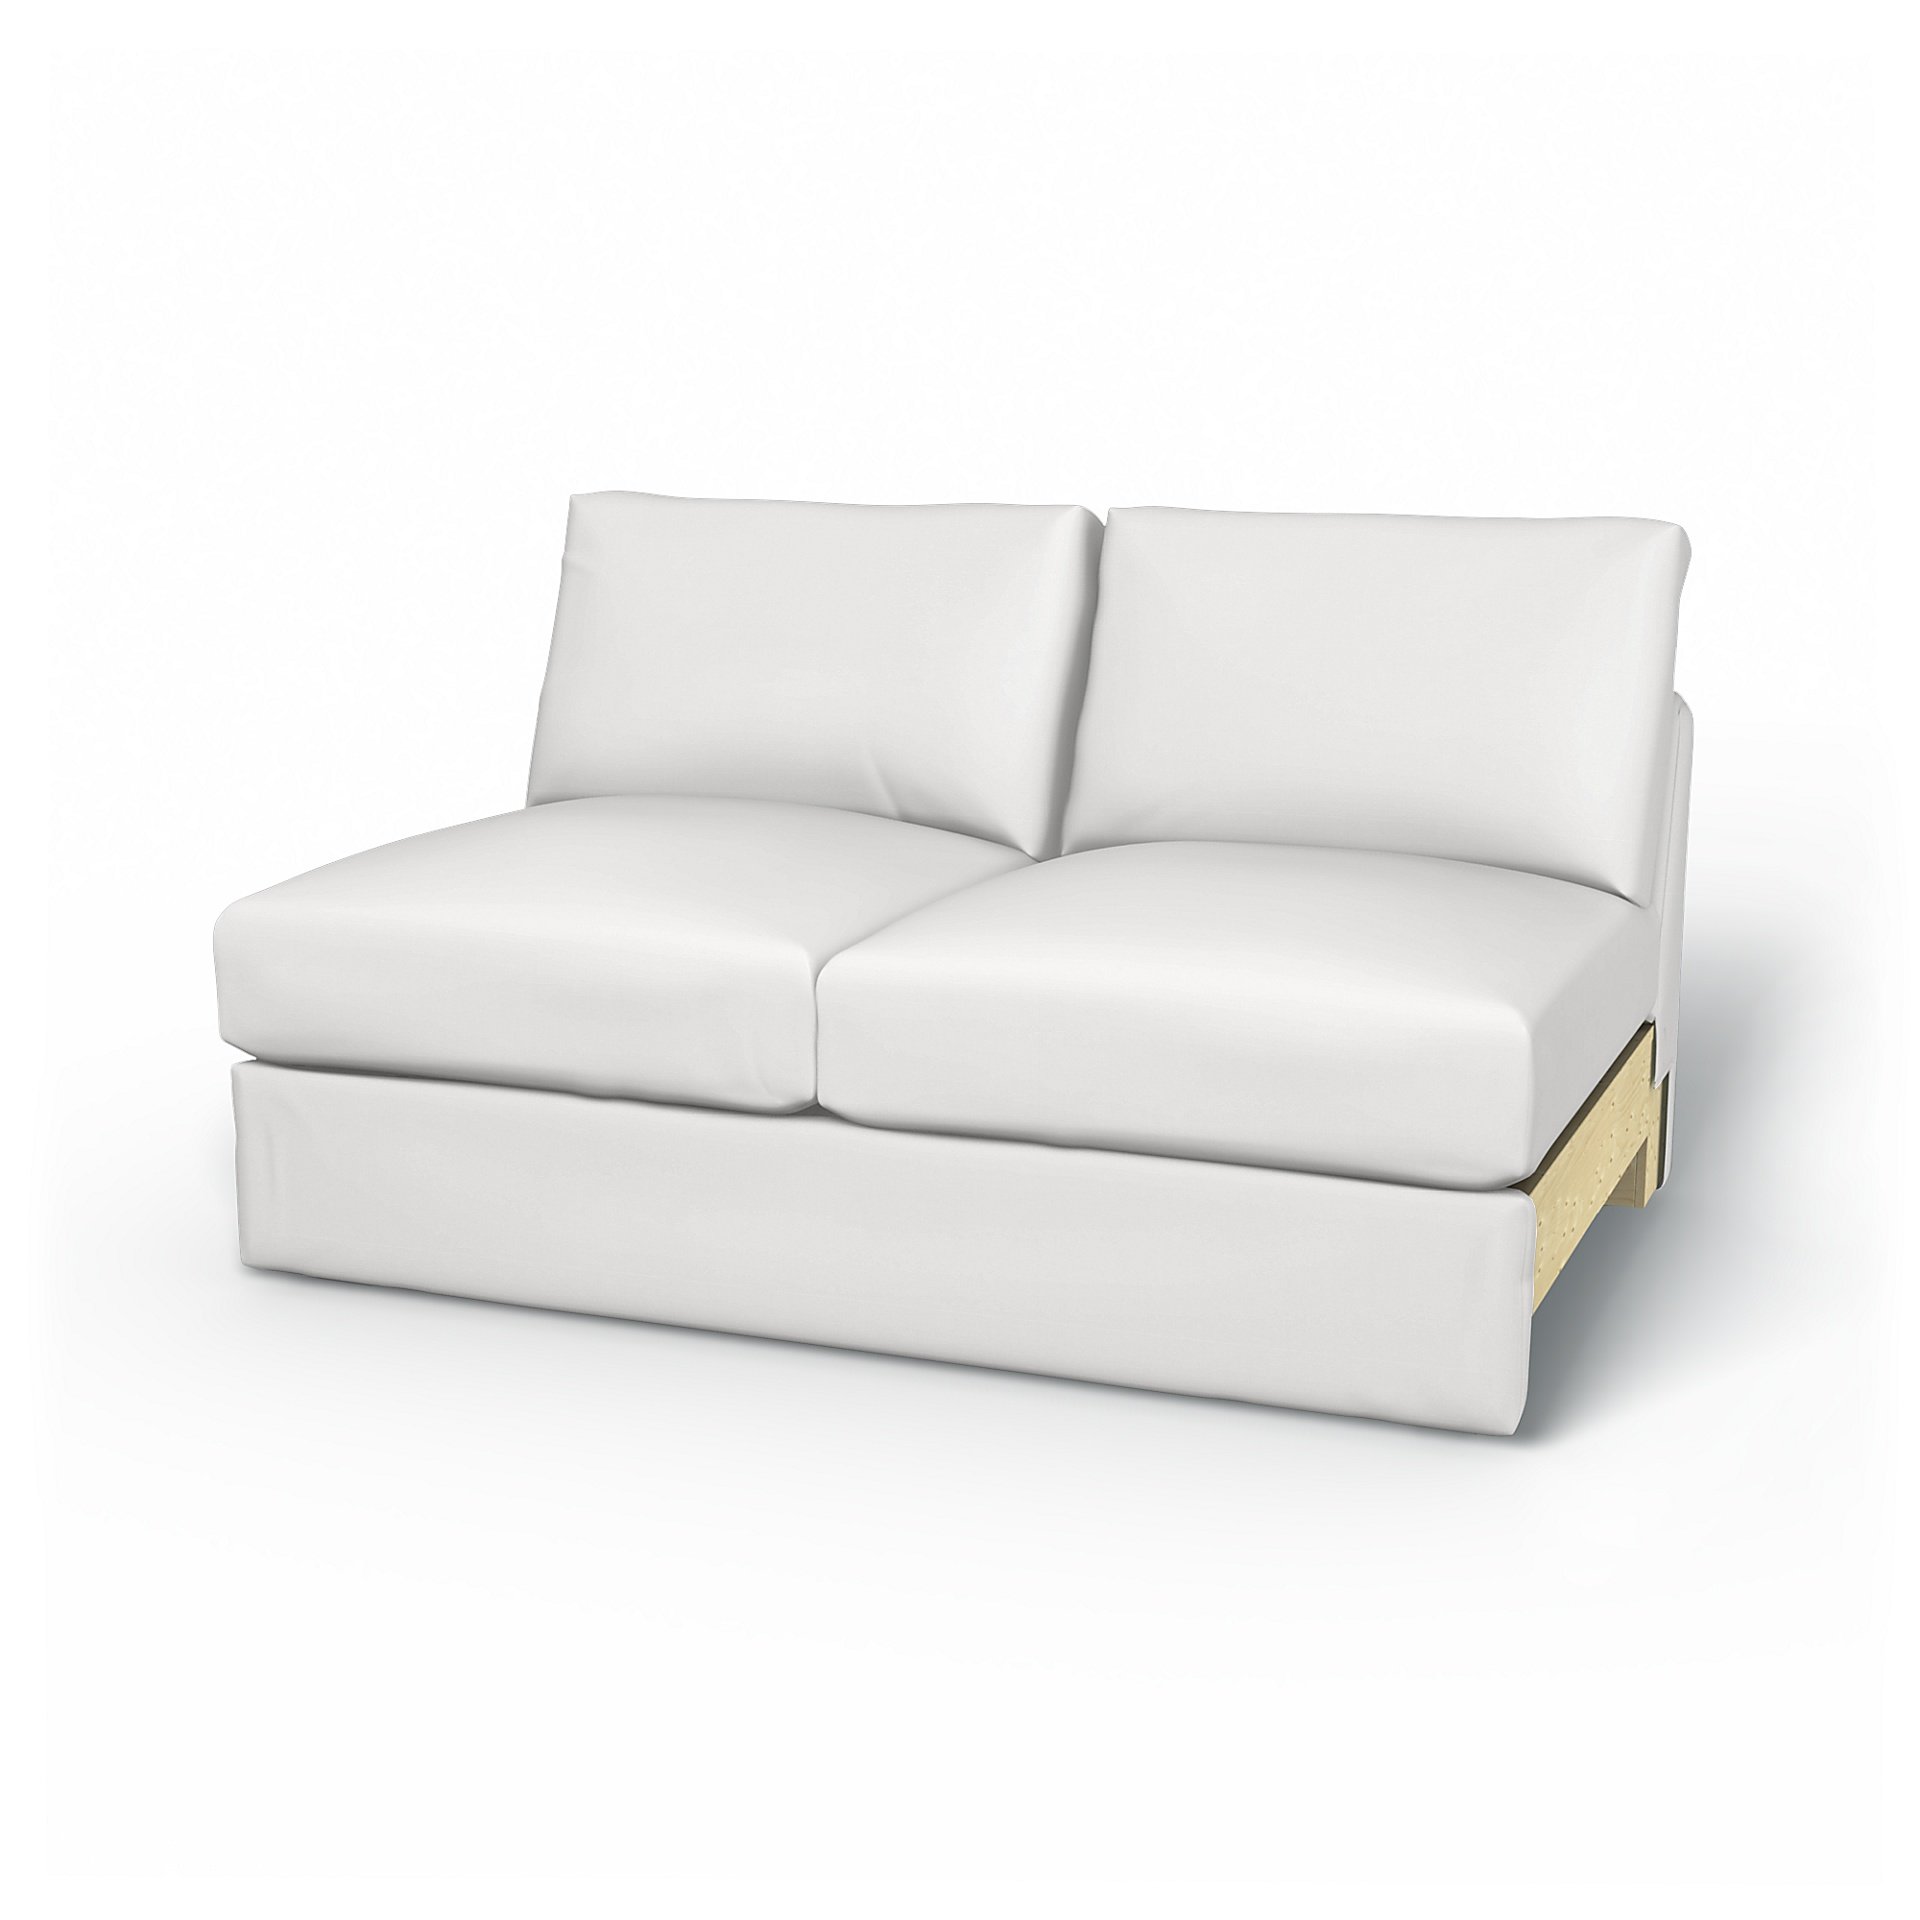 IKEA - Vimle 2 seater bed sofa without armrests, Absolute White, Cotton - Bemz